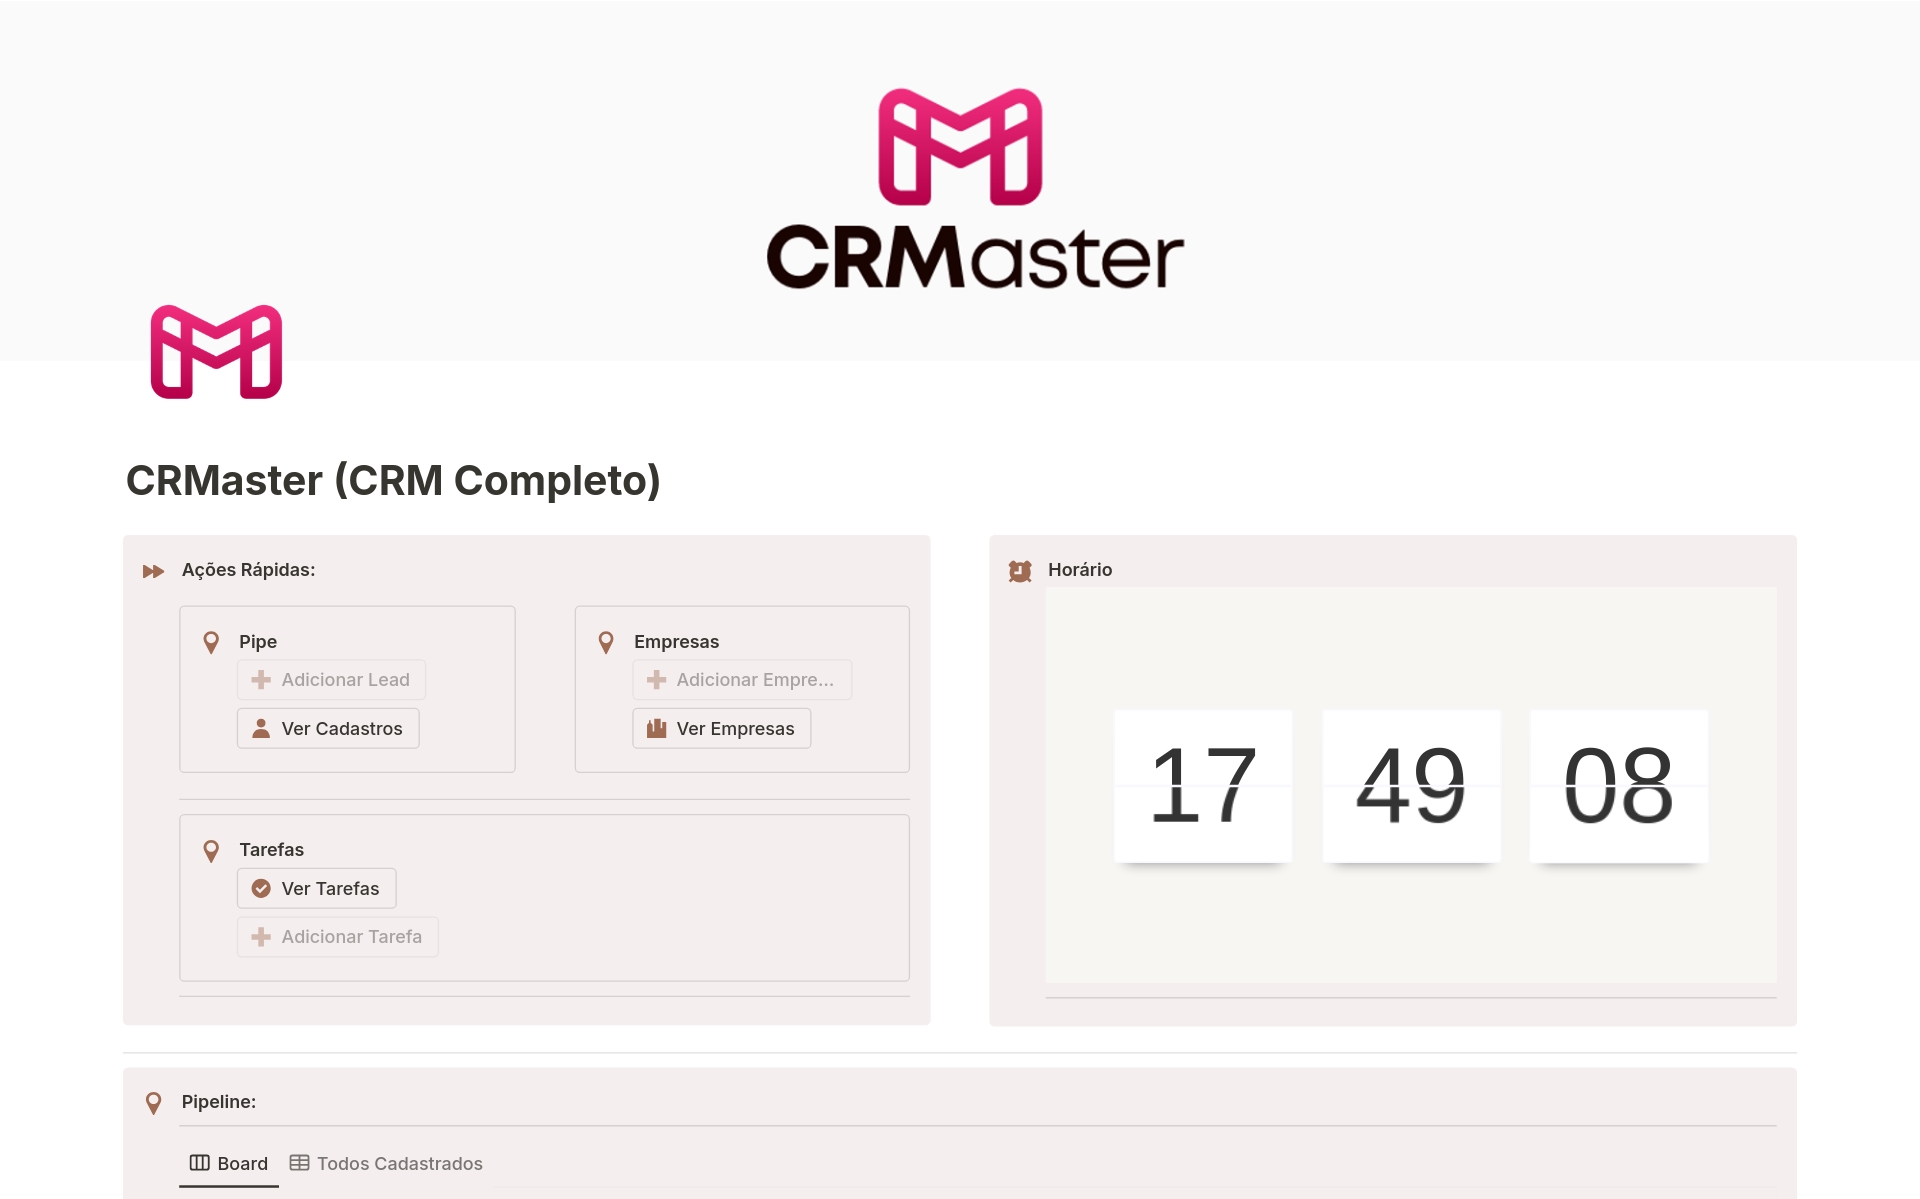 A template preview for CRMaster - CRM Completo